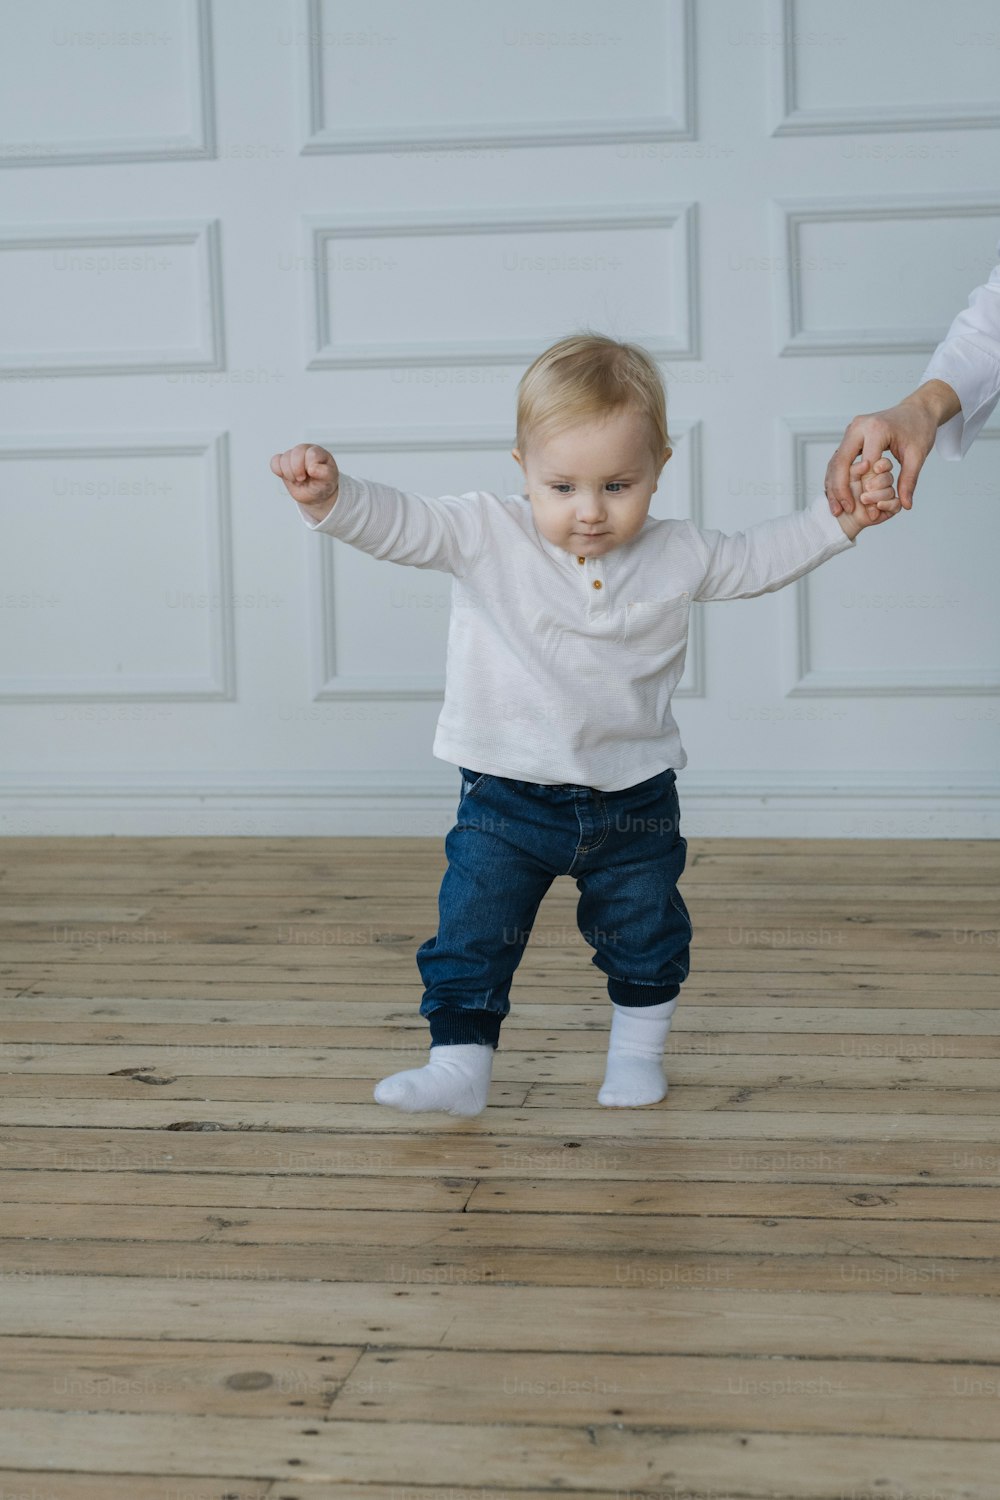 a baby standing on a wooden floor holding the hand of an adult